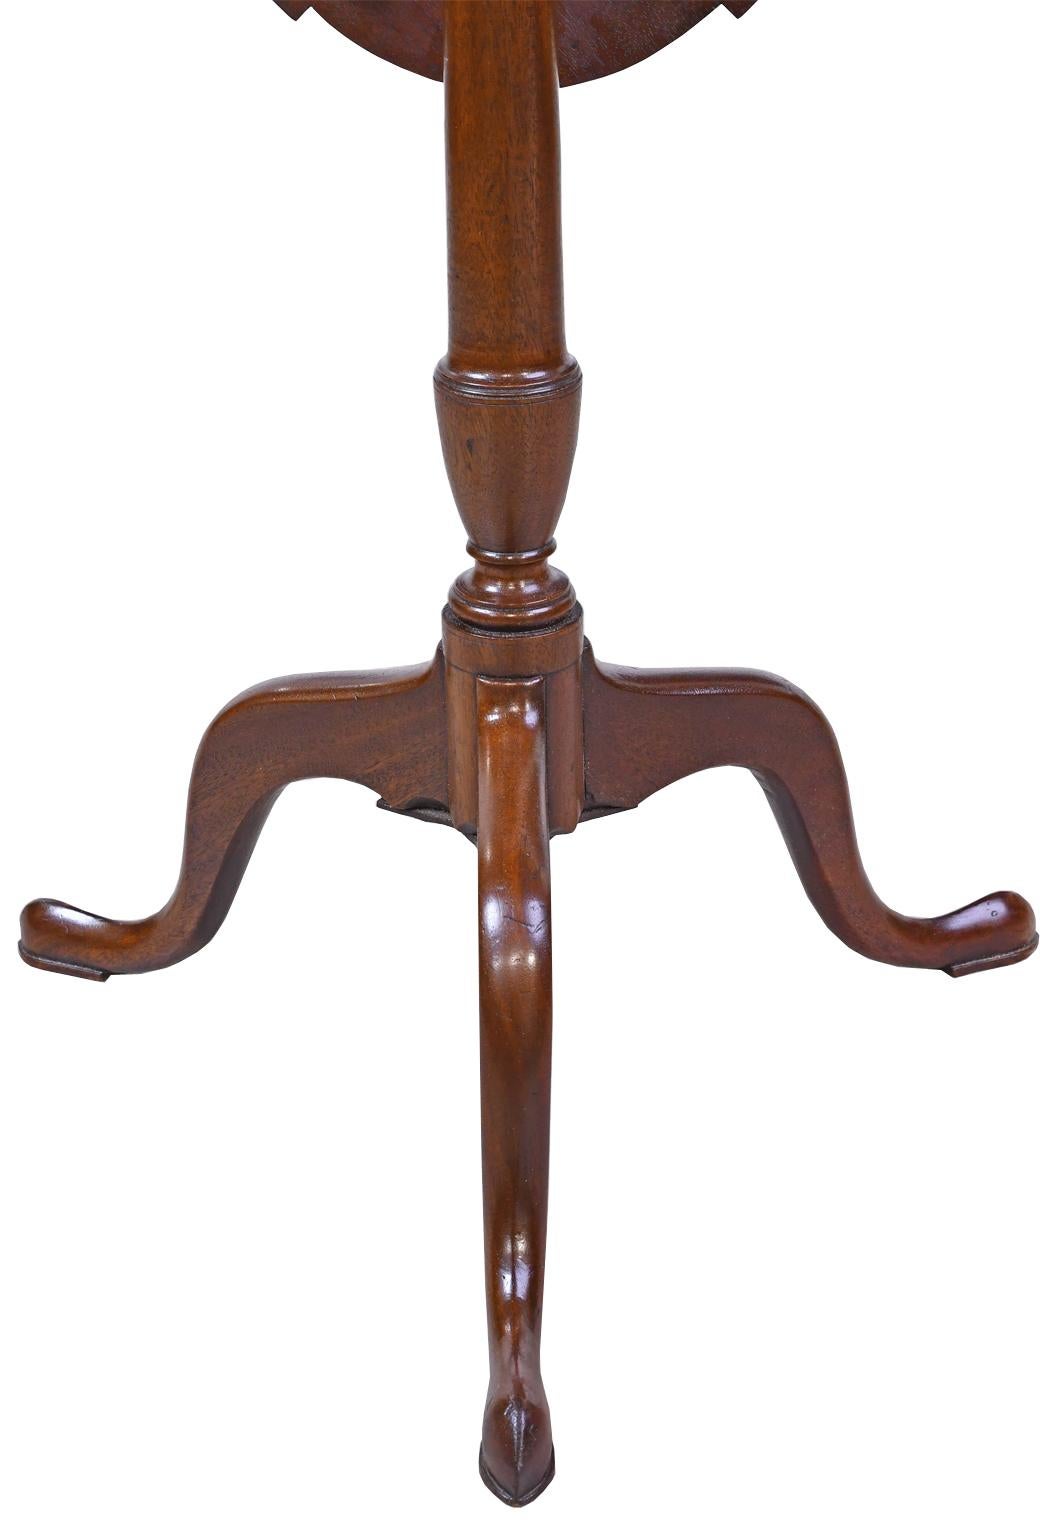 Turned Tilt-Top Tripod Pedestal Table/ Candlestand in Mahogany, North Shore, MA For Sale